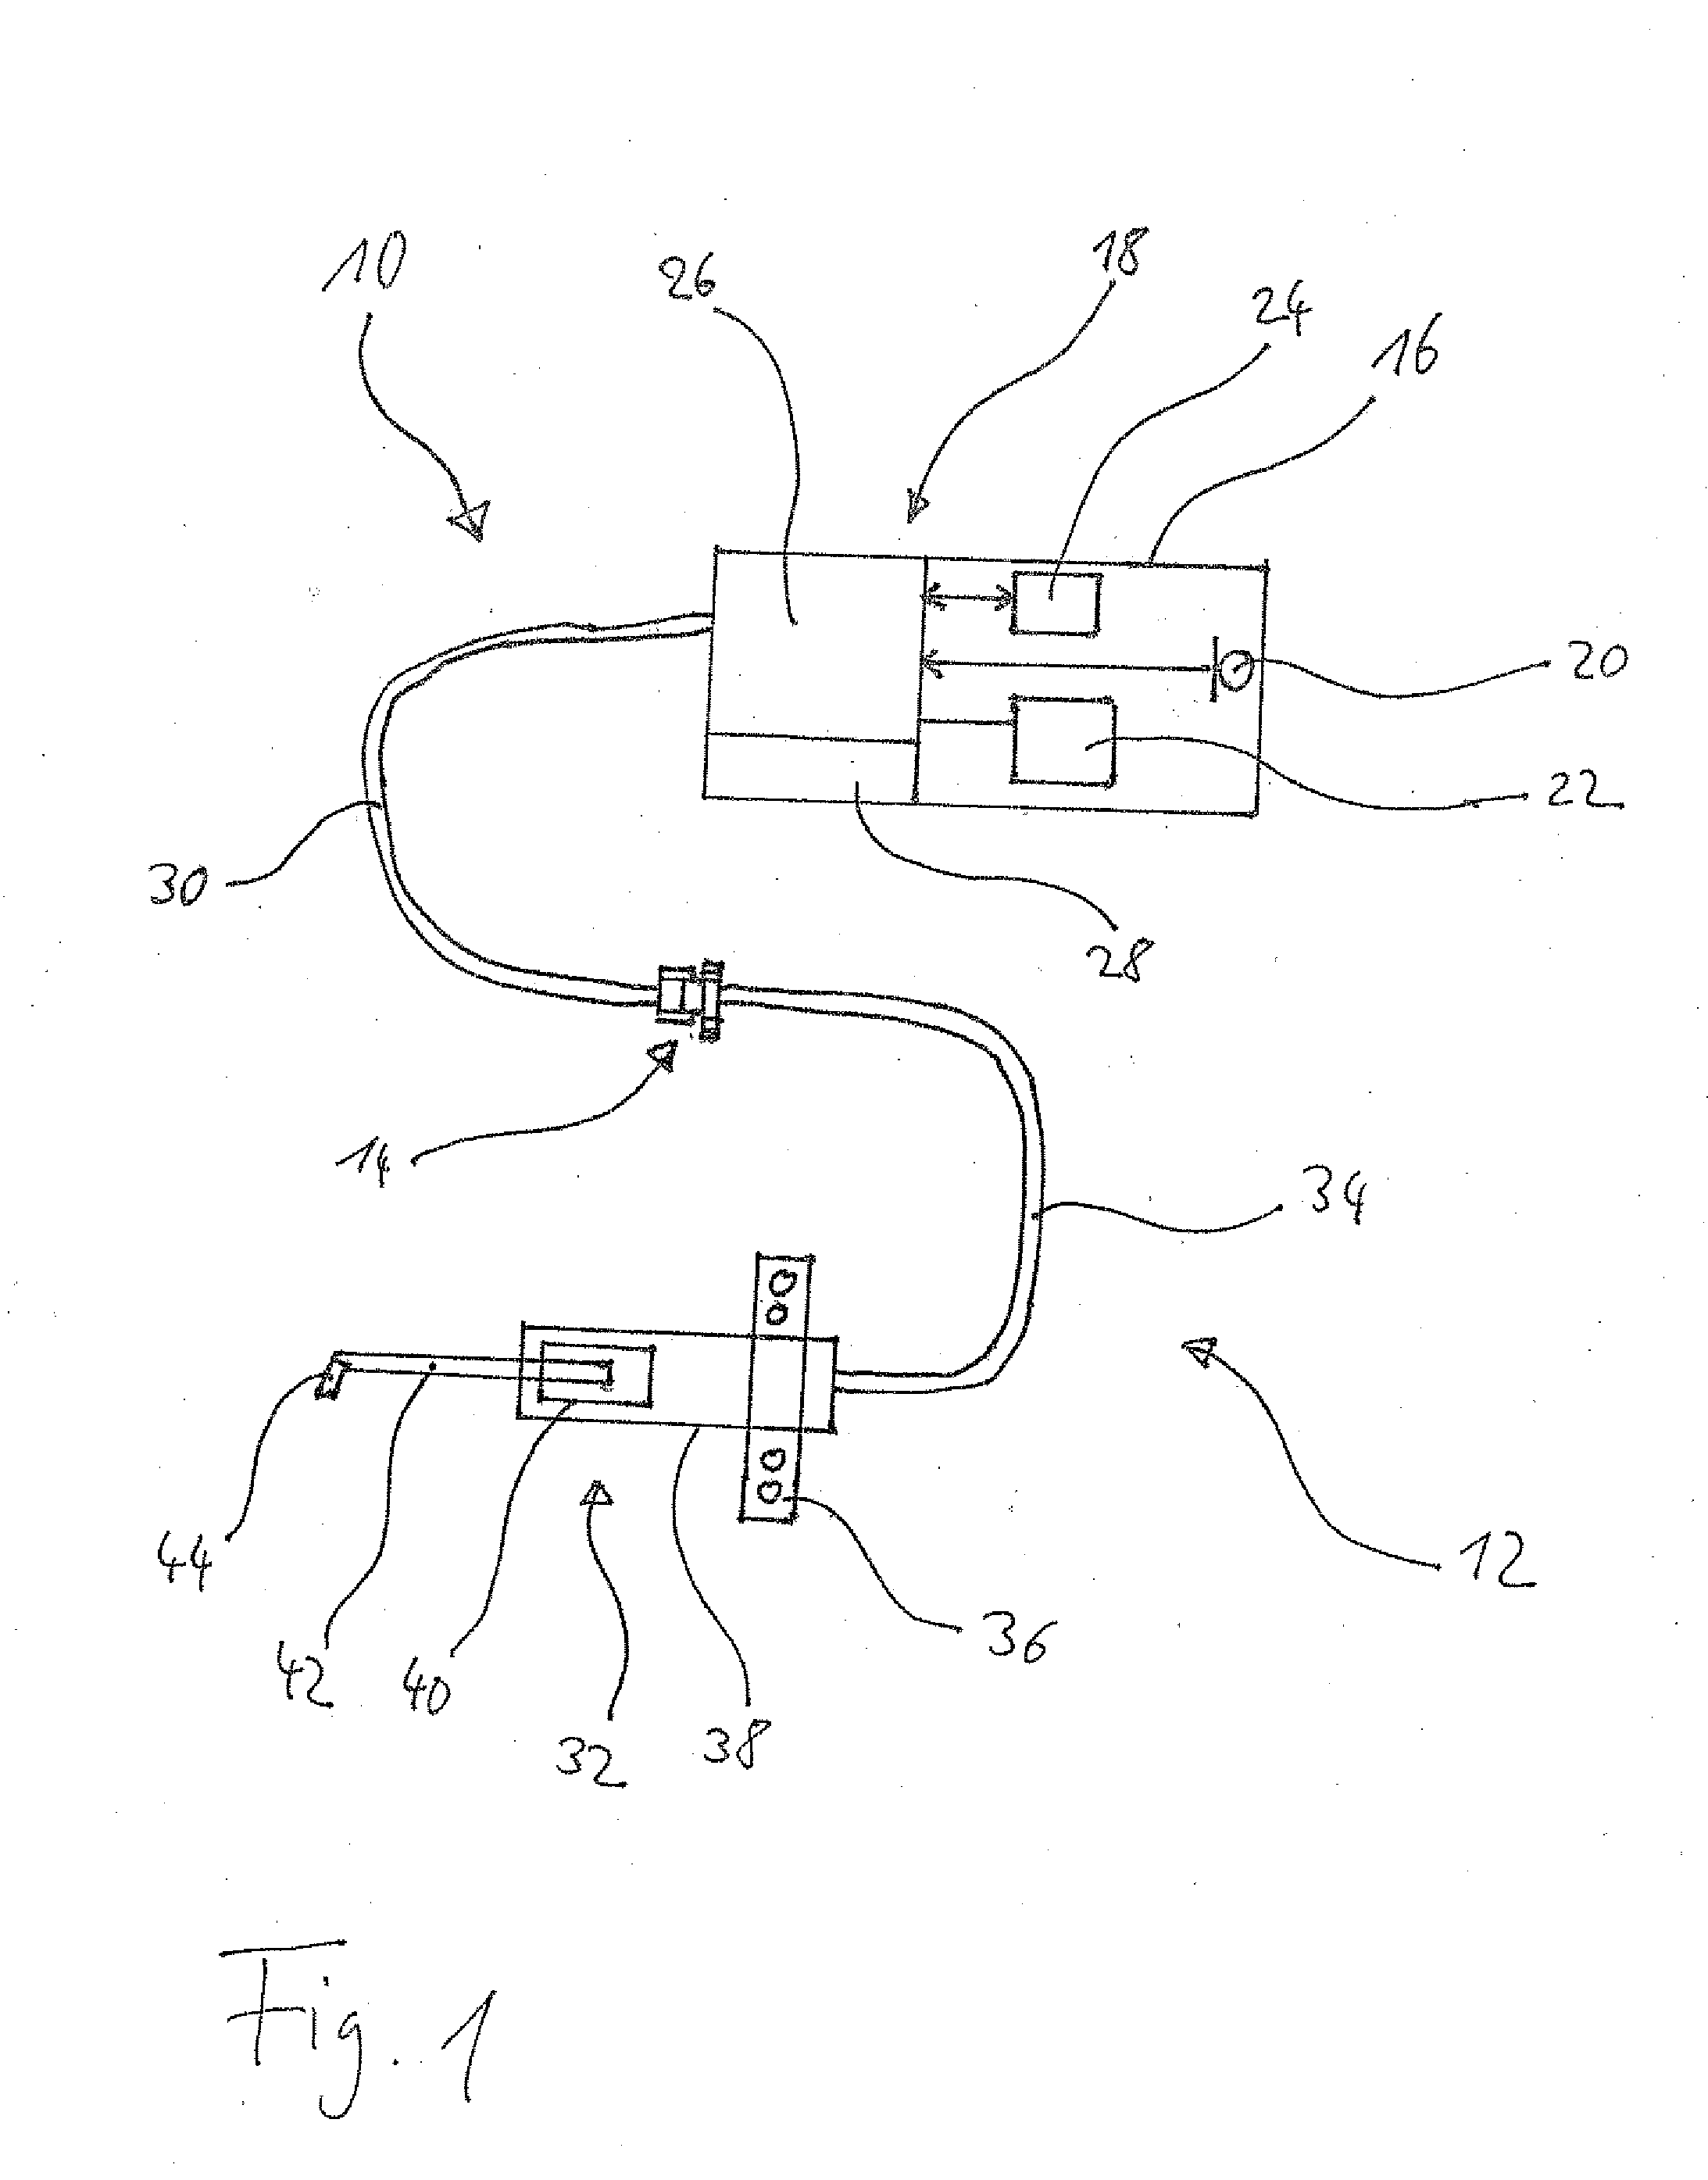 Method for individually fitting a hearing instrument